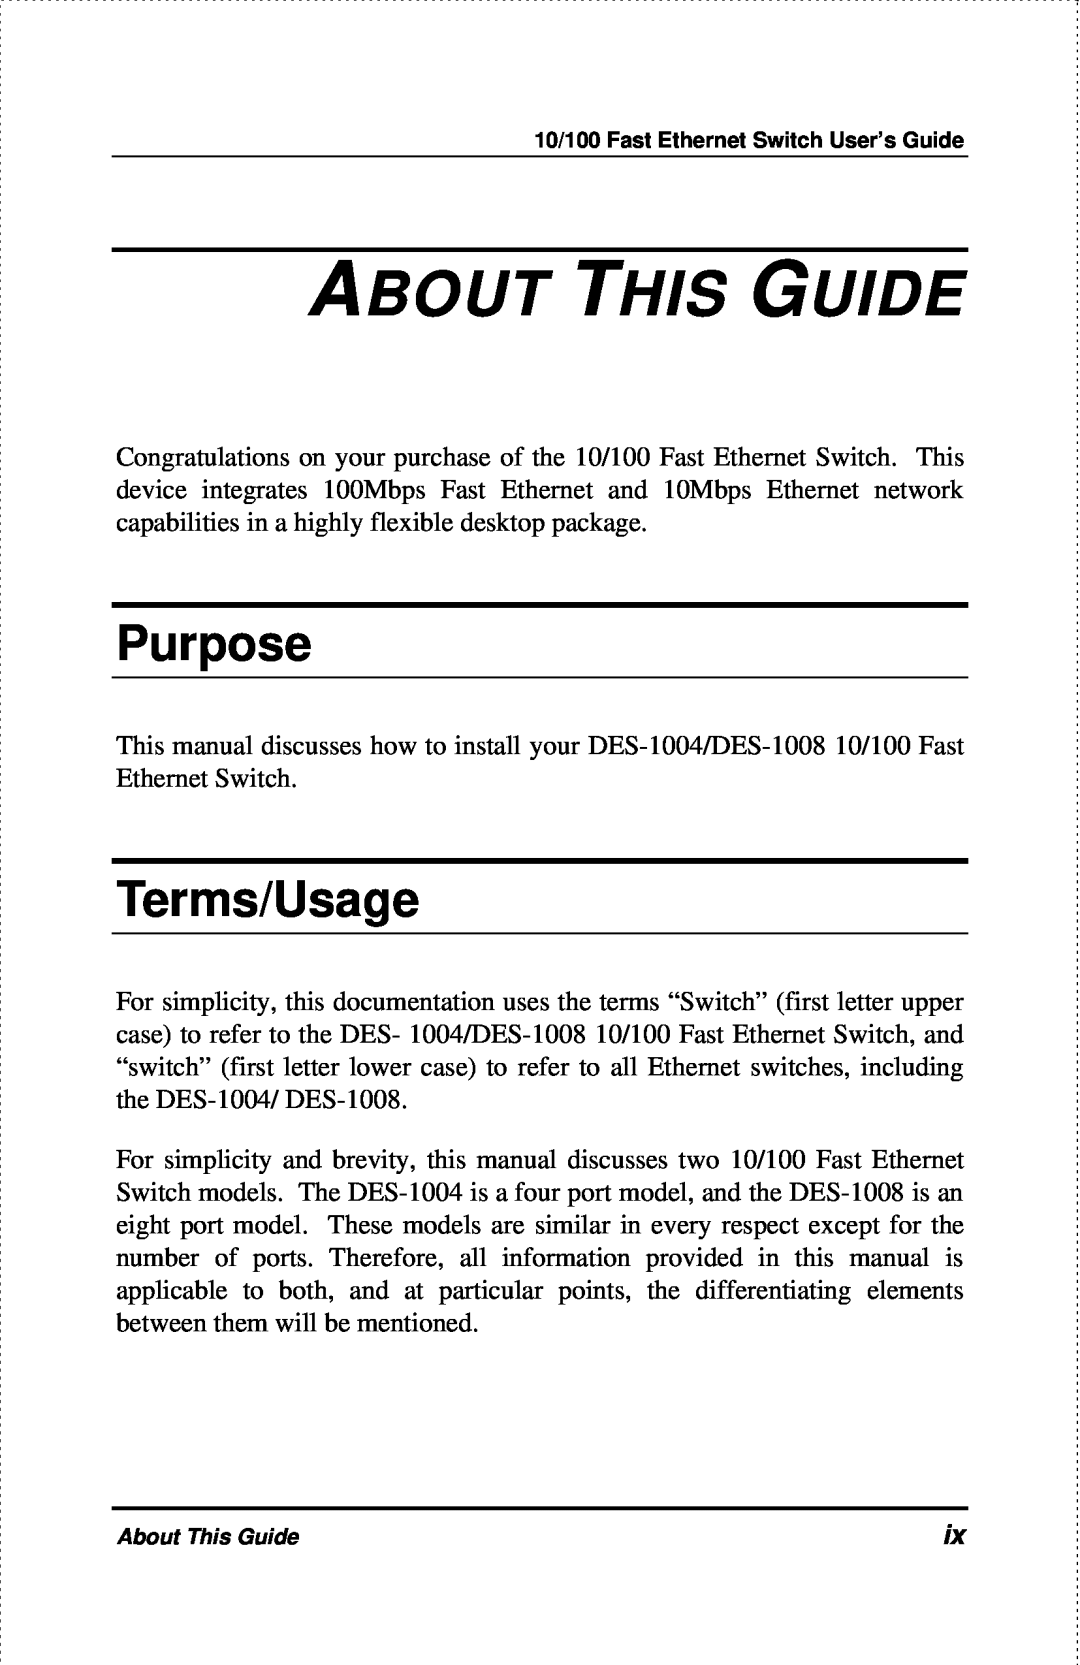 D-Link DES-1004 manual About This Guide, Purpose, Terms/Usage 